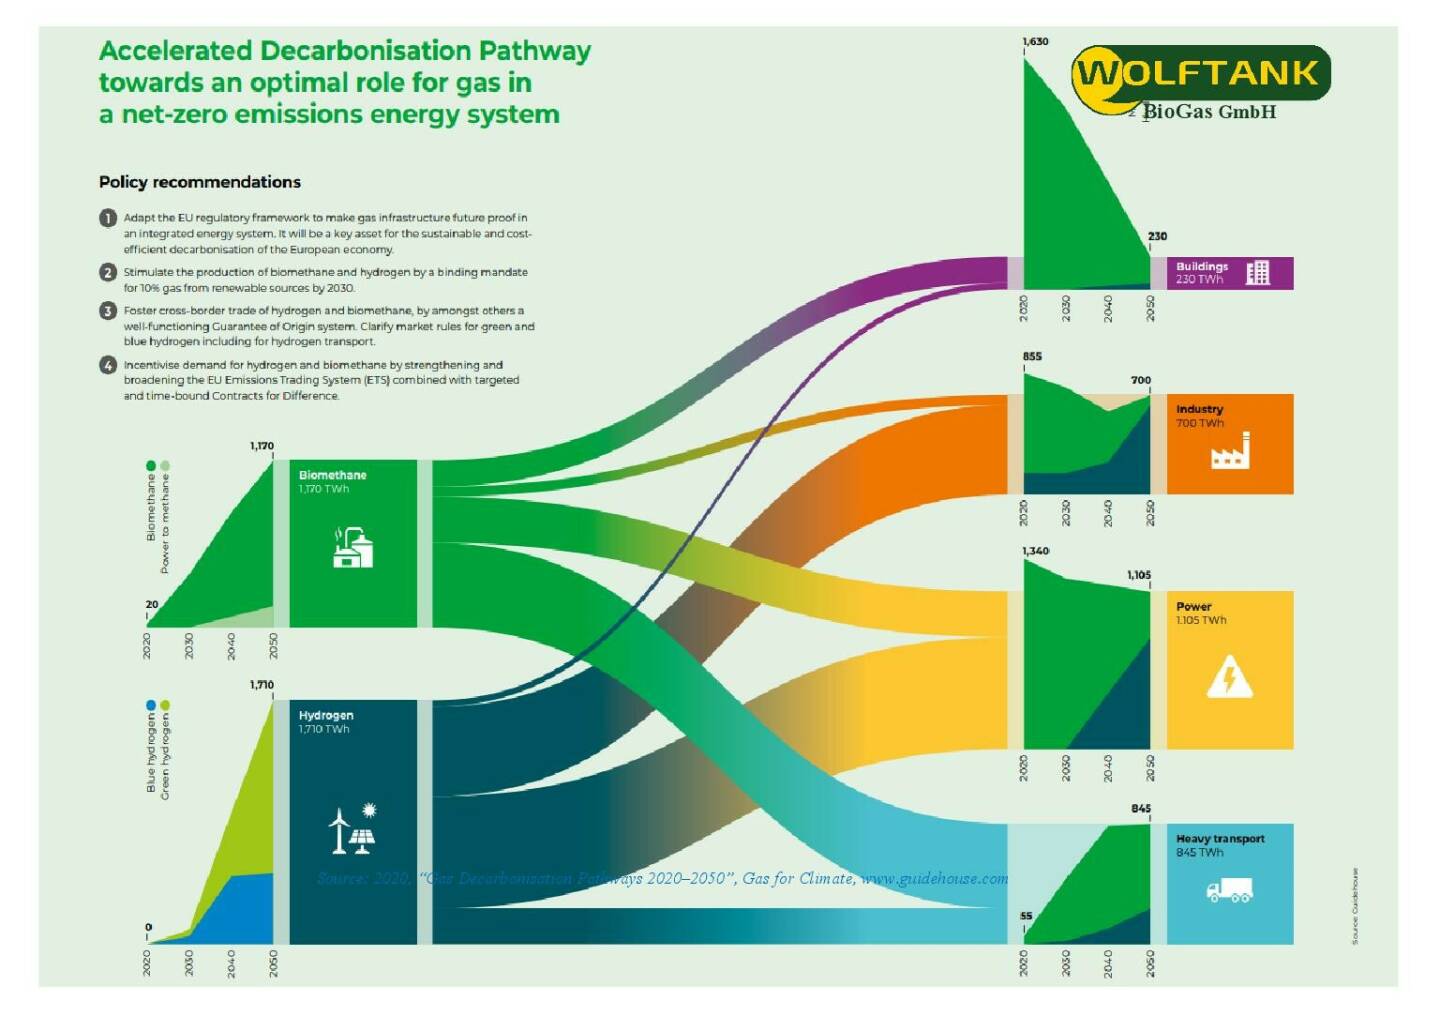 Wolftank - Accelerated Decarbonisation Pathway towards an optimal role for gas in a net-zero emissions energy system